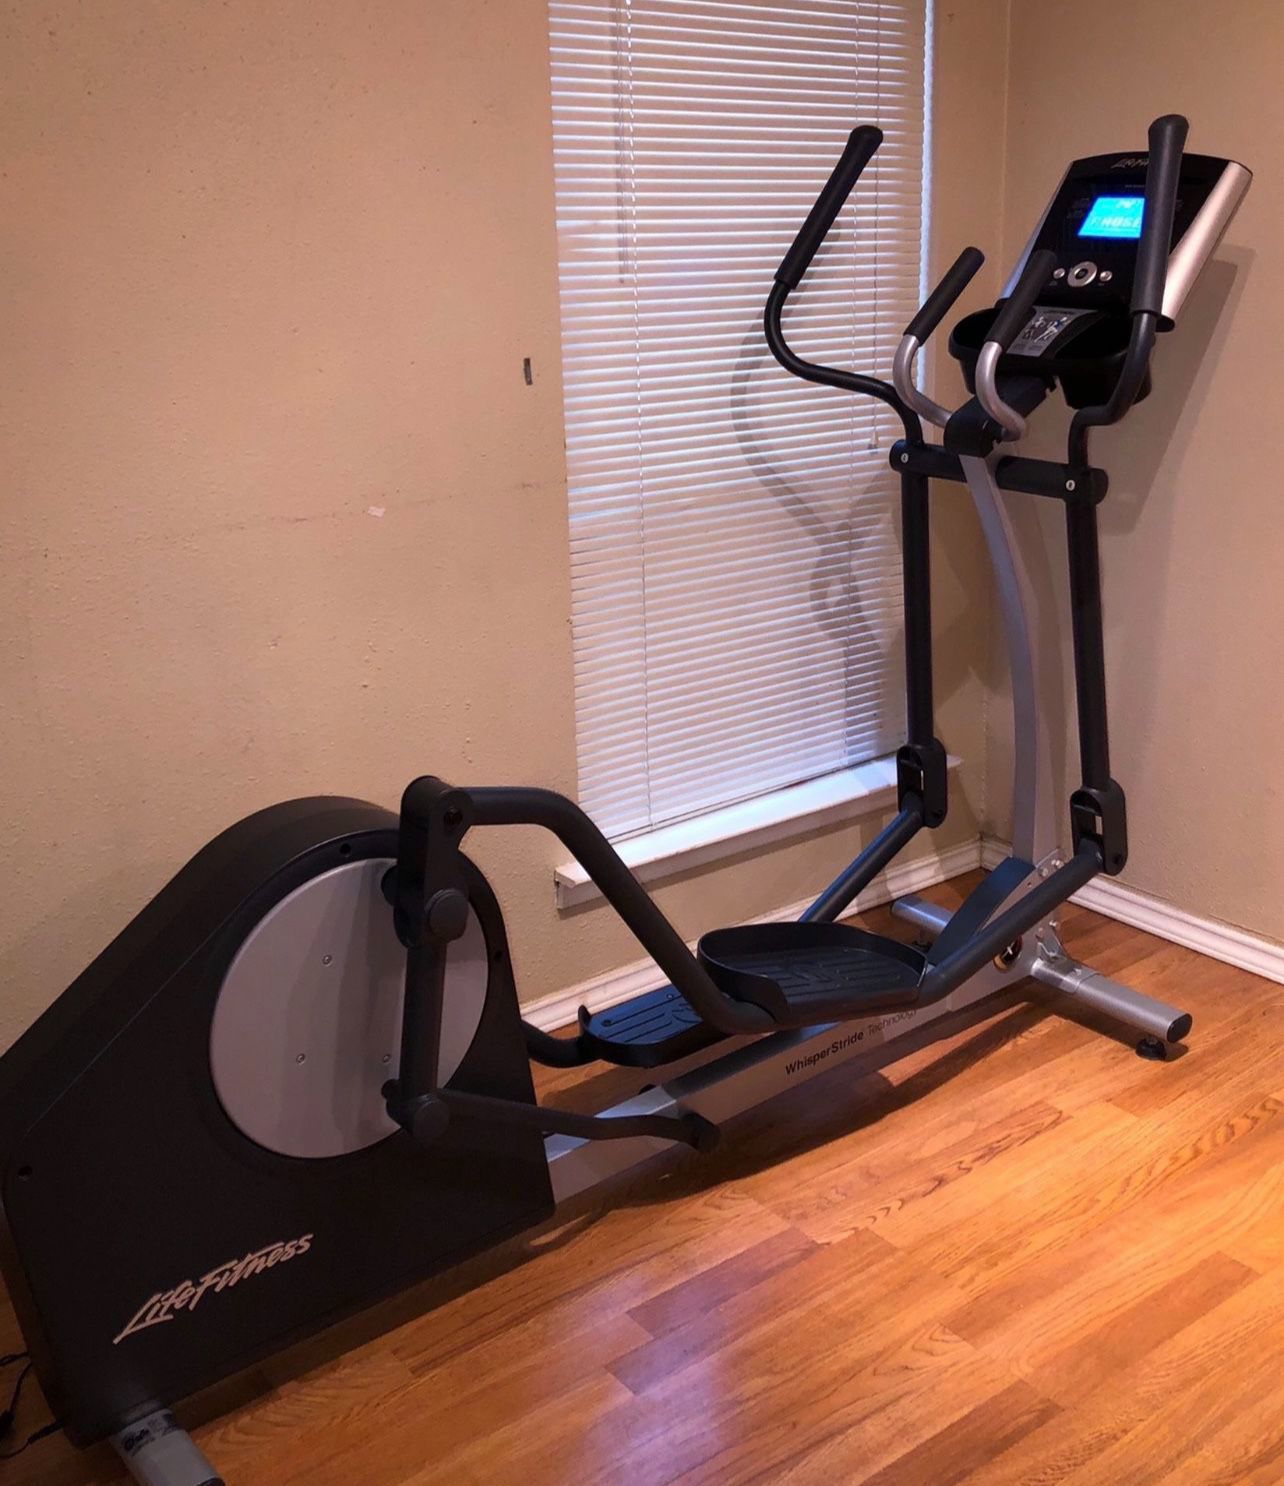 Life Fitness X1 Commercial Grade Elliptical Cross Trainer (Gym Quality)